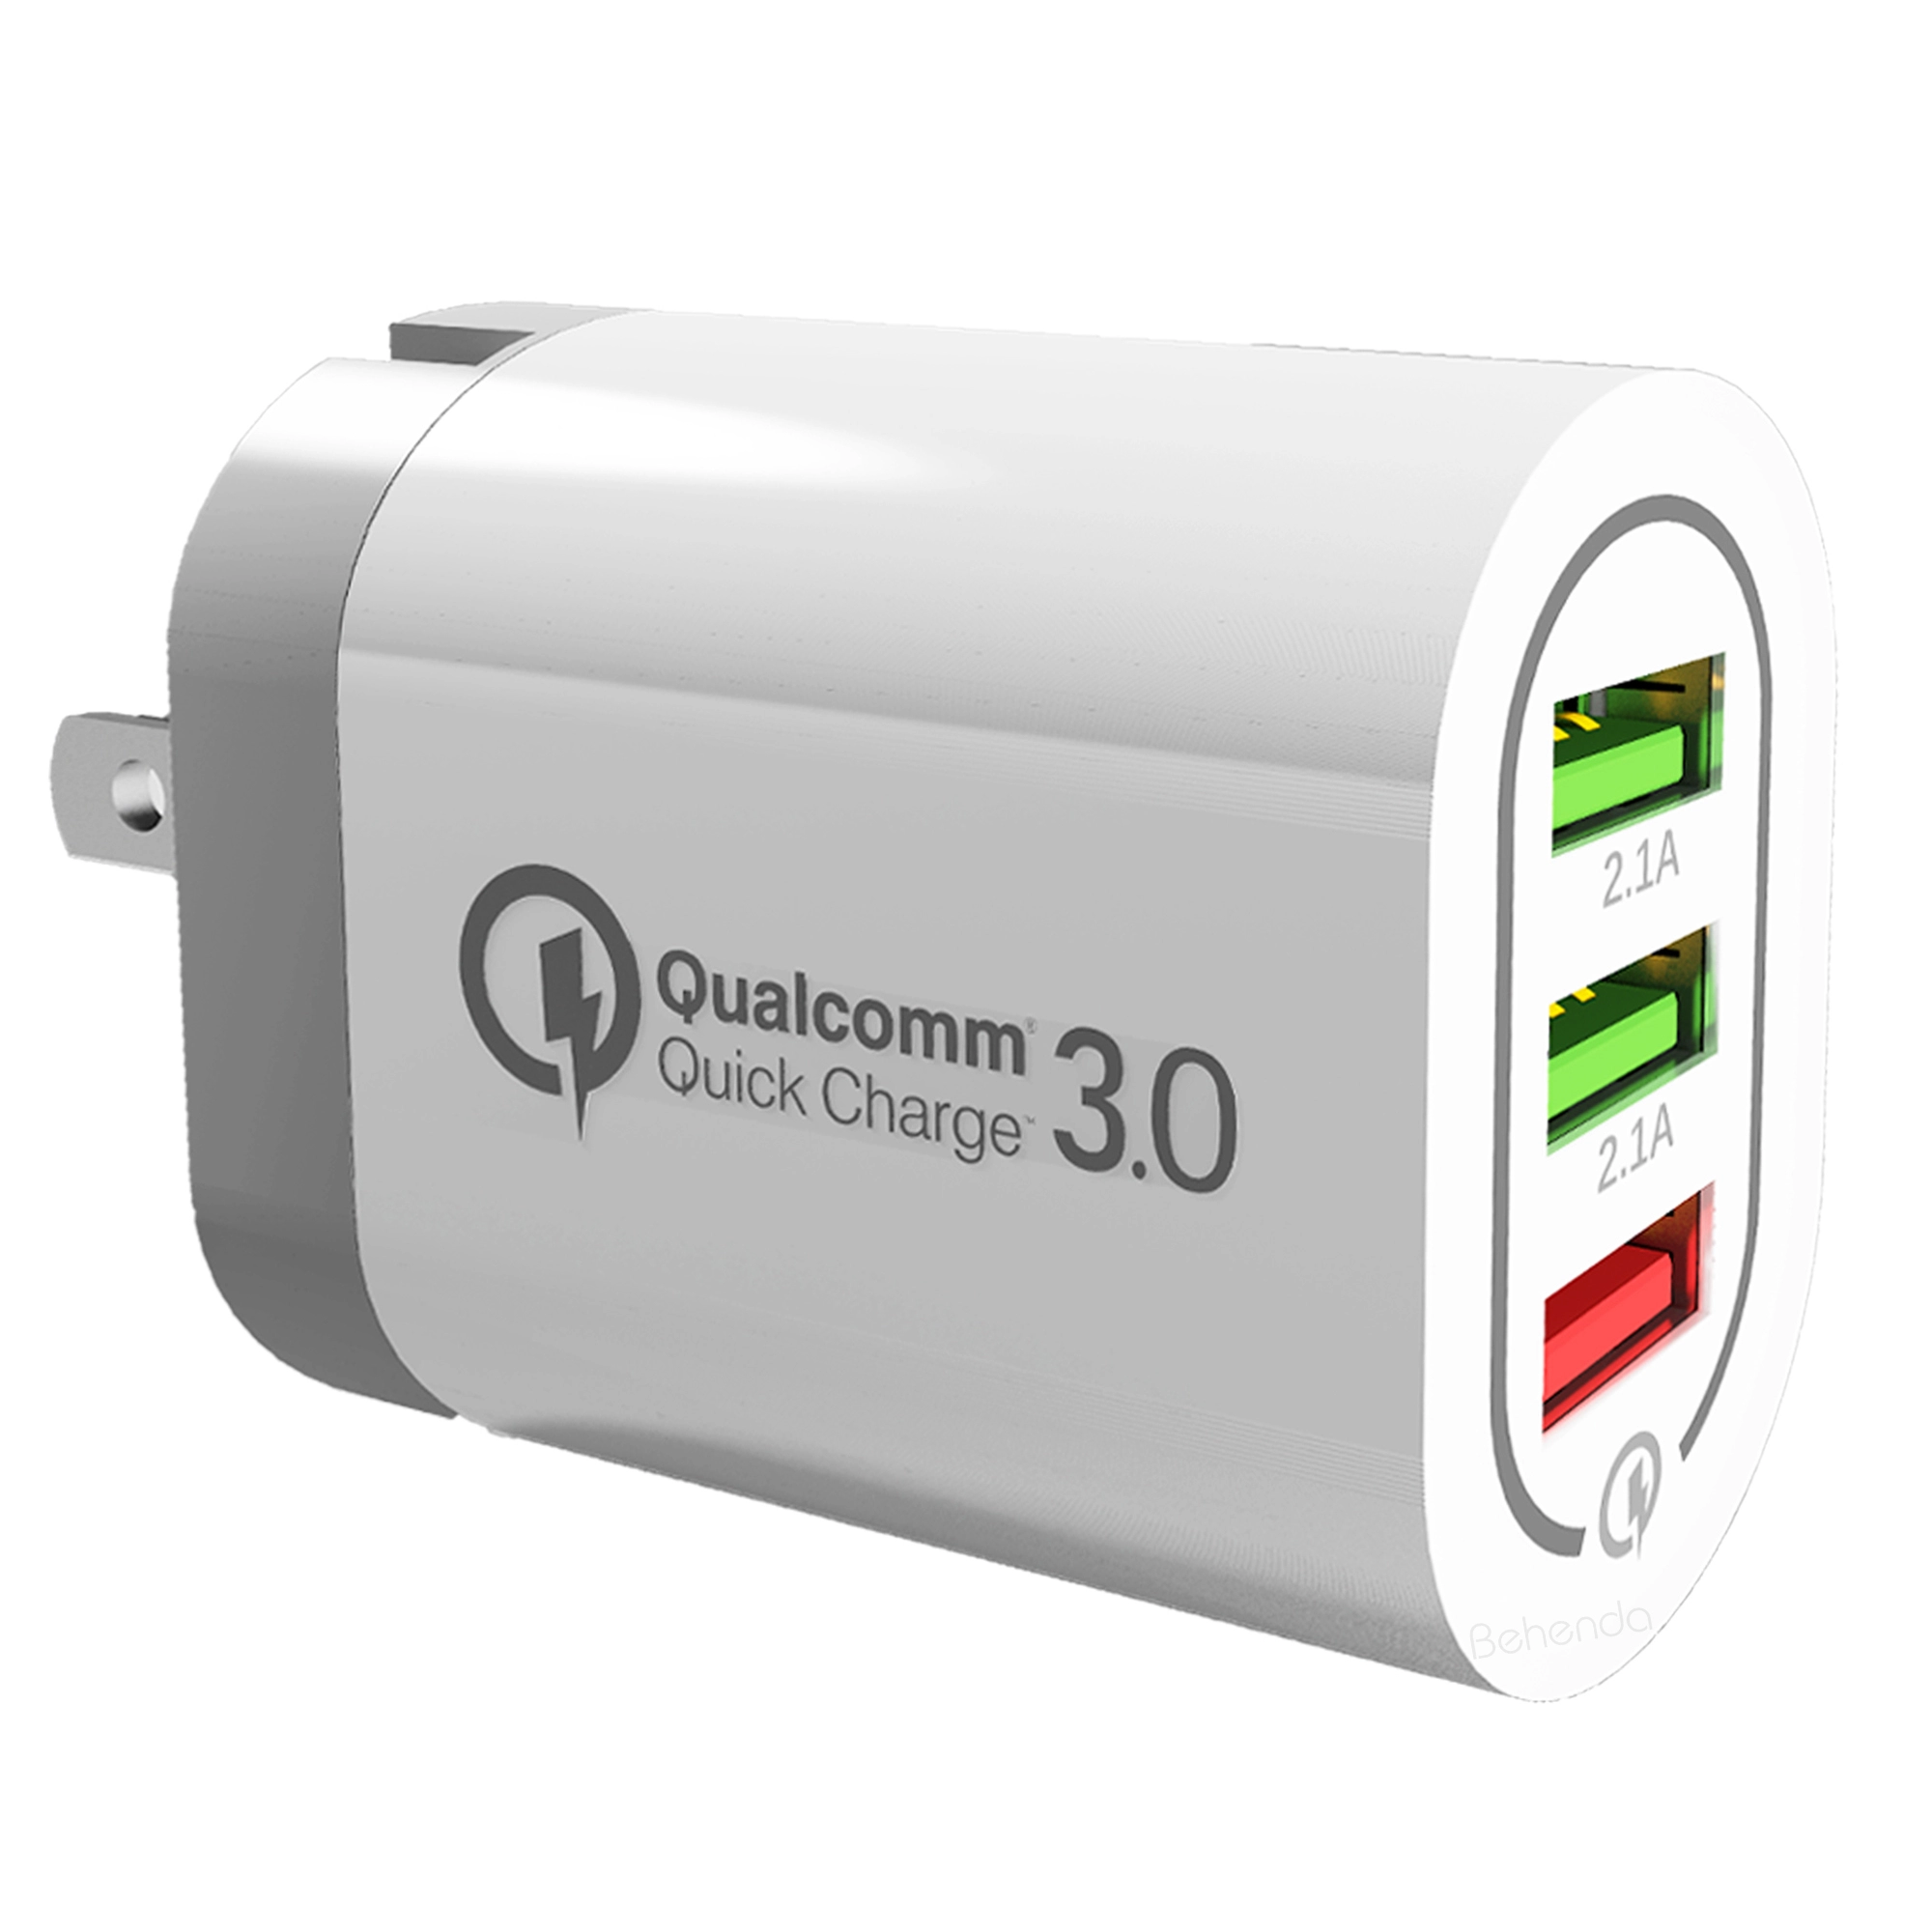 Qualcomm Quick Charge 3.0 Charger USB Wall Adapter Multi Port 3 USB Port Fast  Charging Travel Charger for Mobile Phone Cellphone